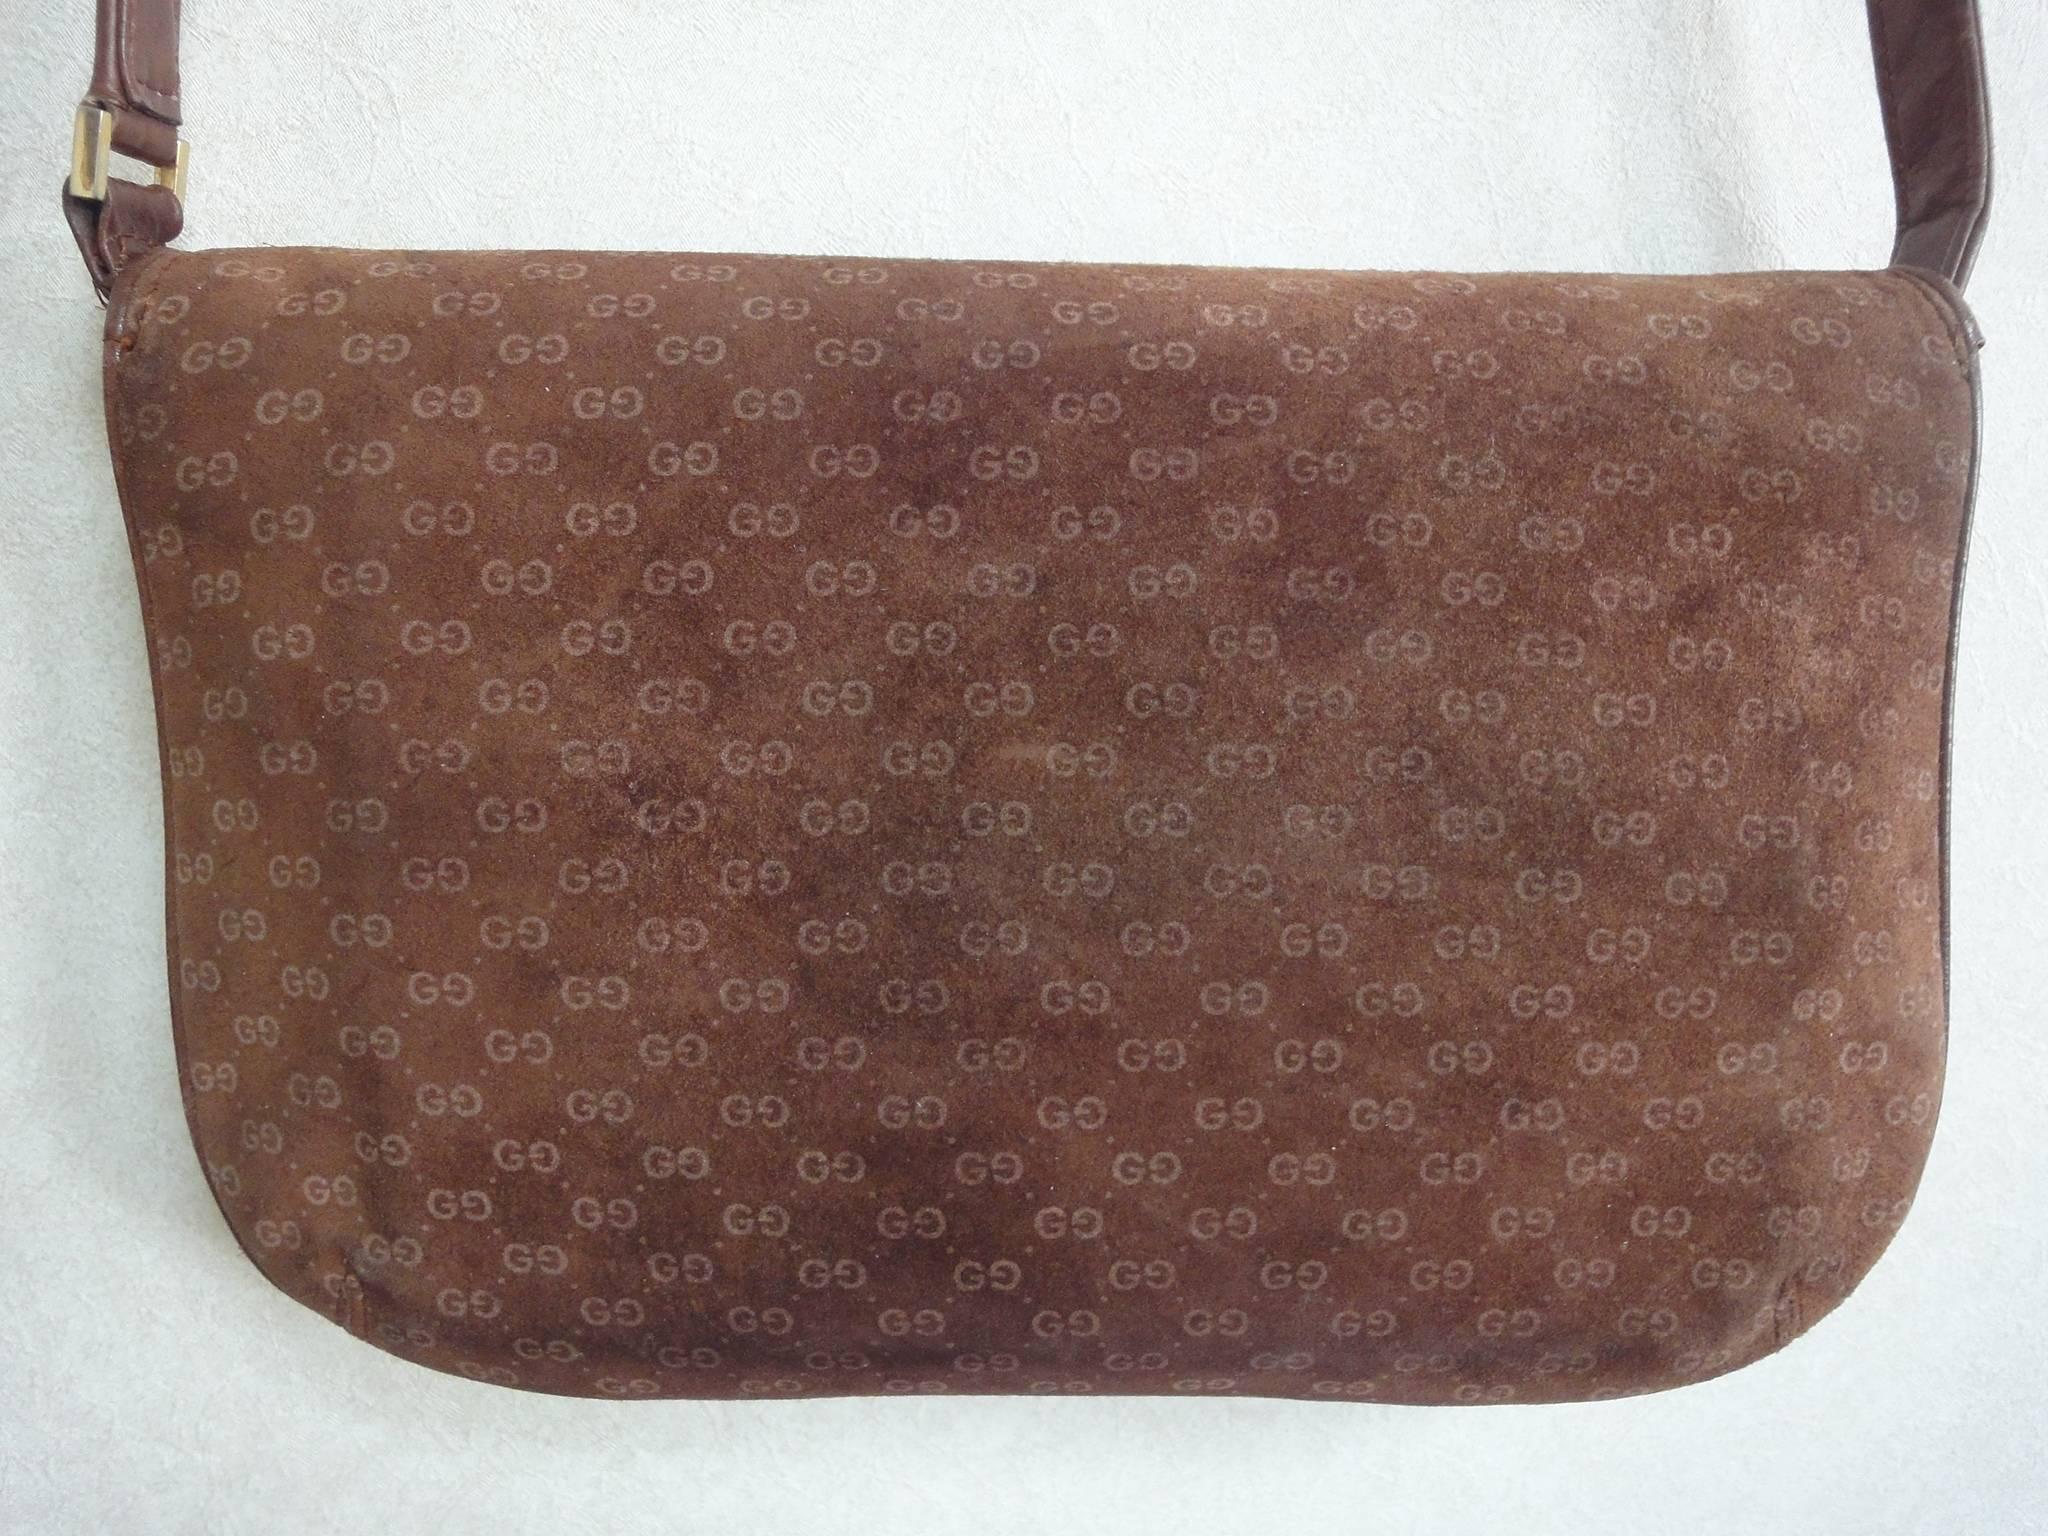 Vintage Gucci dark brown suede leather clutch shoulder bag with micro, mini GG prints allover. Rare, Collectible Masterpiece

This is a vintage darkbrown genuine suede leather clutch shoulder purse from Gucci. If you are a vintage Gucci collector